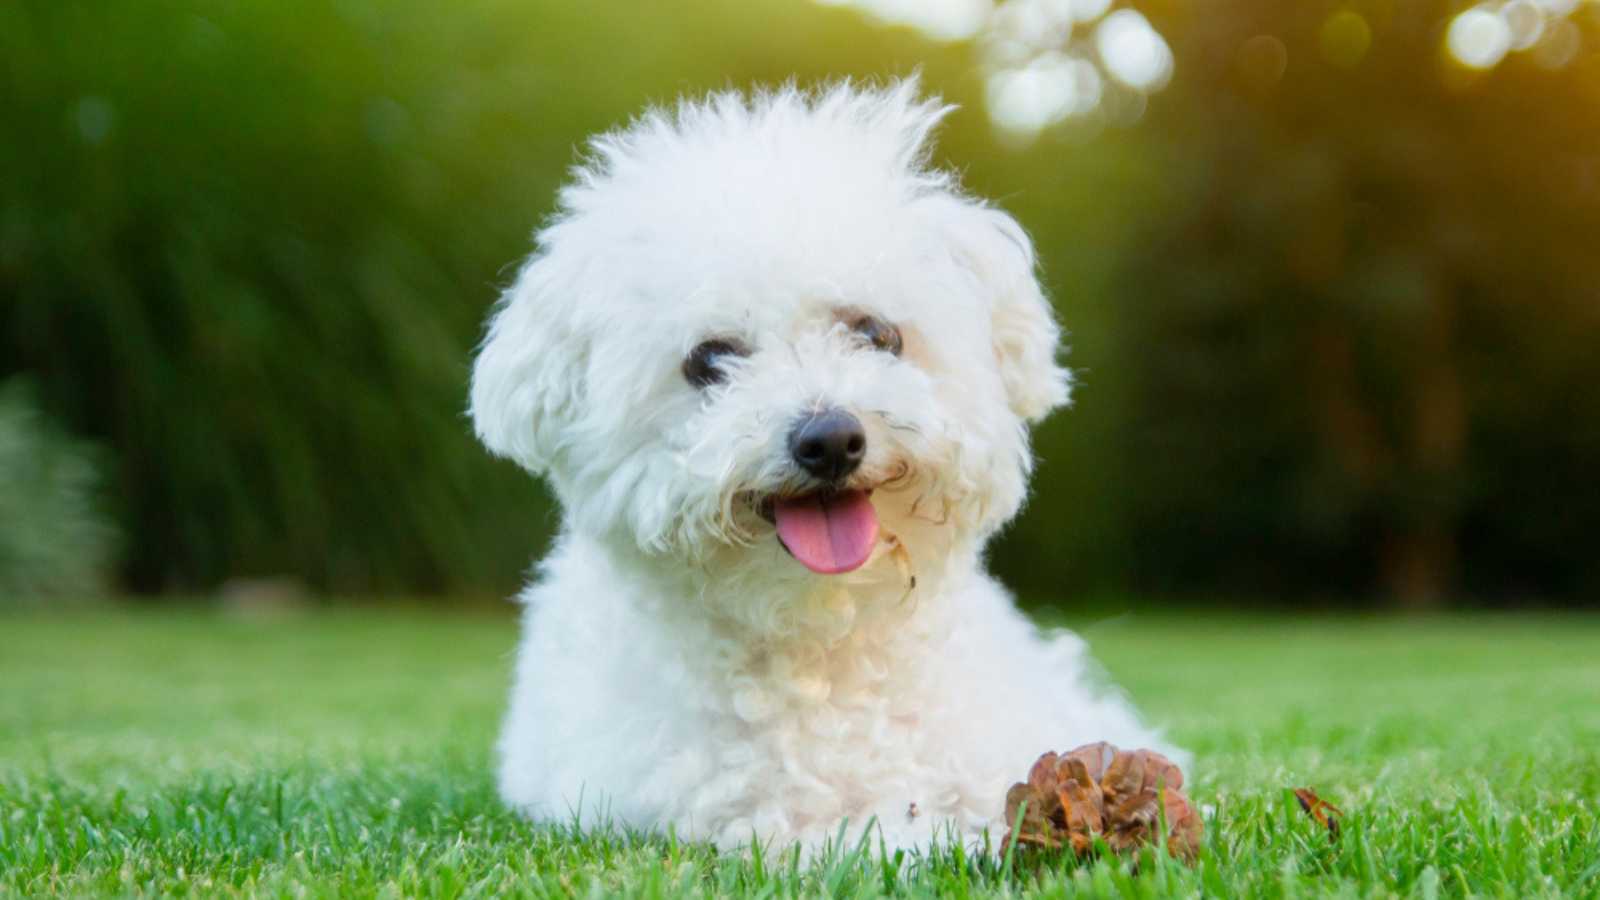 Bichon Frise dog lying on the grass with its tongue out. 